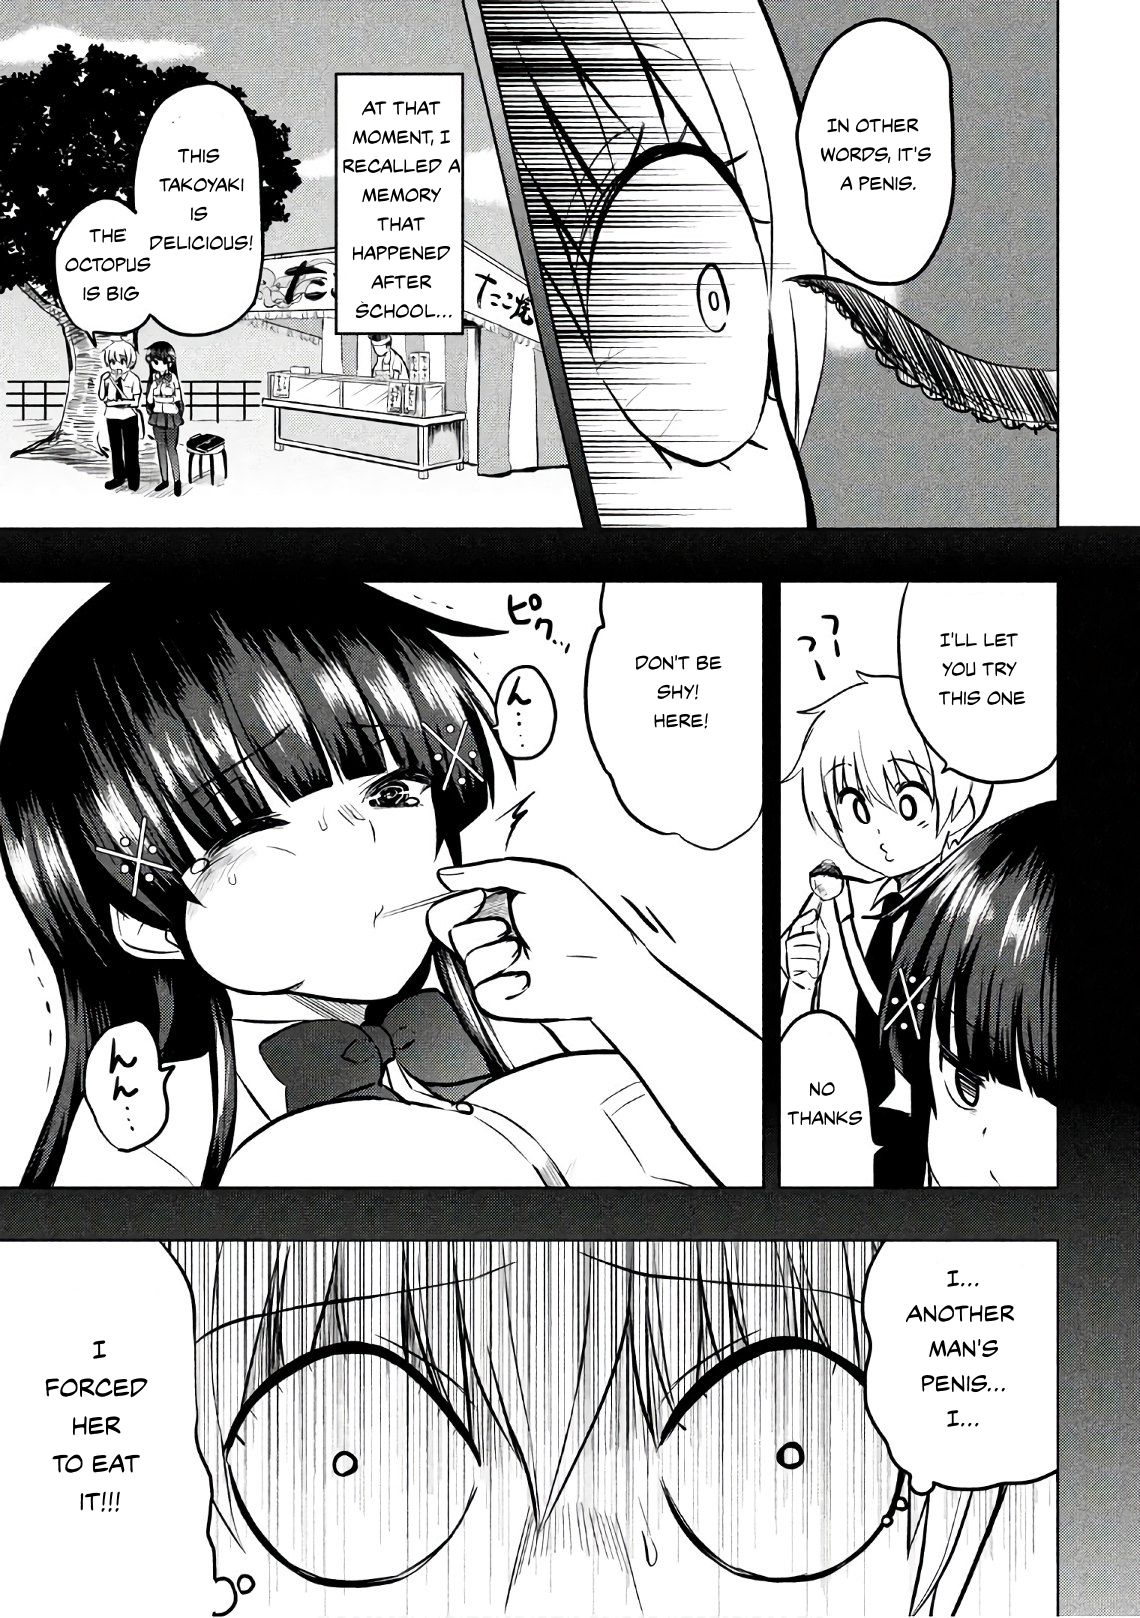 A Girl Who Is Very Well-Informed About Weird Knowledge, Takayukashiki Souko-San - Page 3